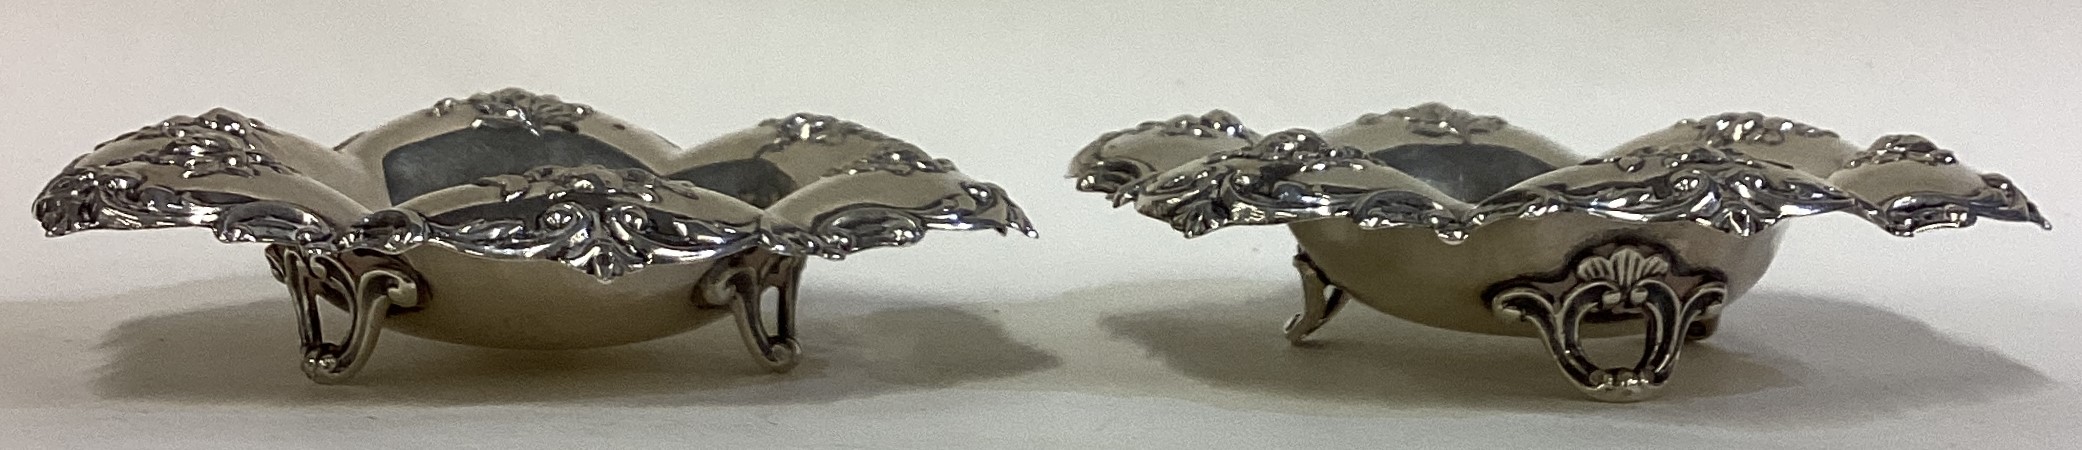 A pair of ornate American silver dishes on feet. - Image 2 of 3